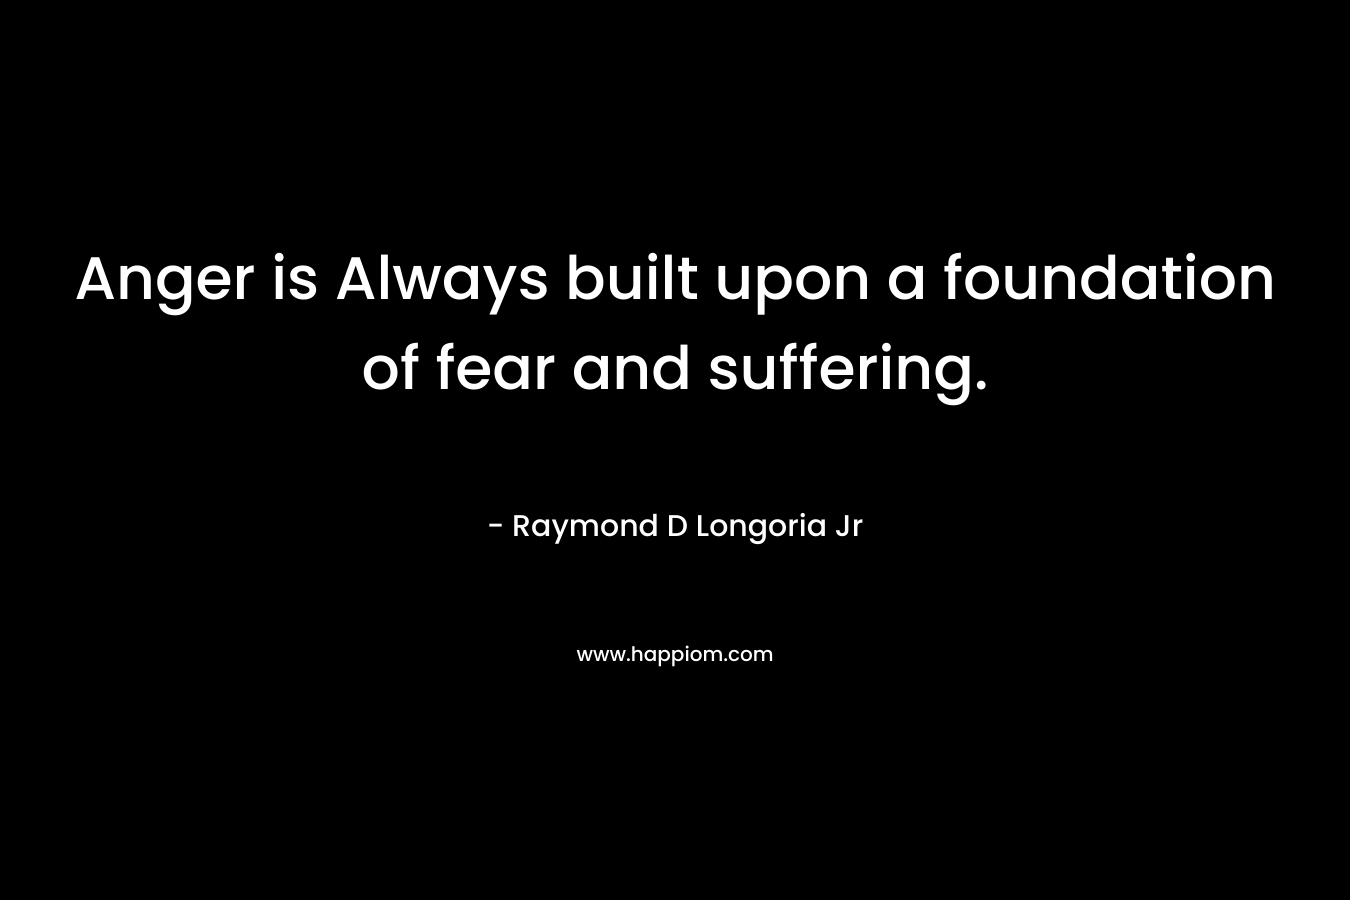 Anger is Always built upon a foundation of fear and suffering. – Raymond D Longoria Jr